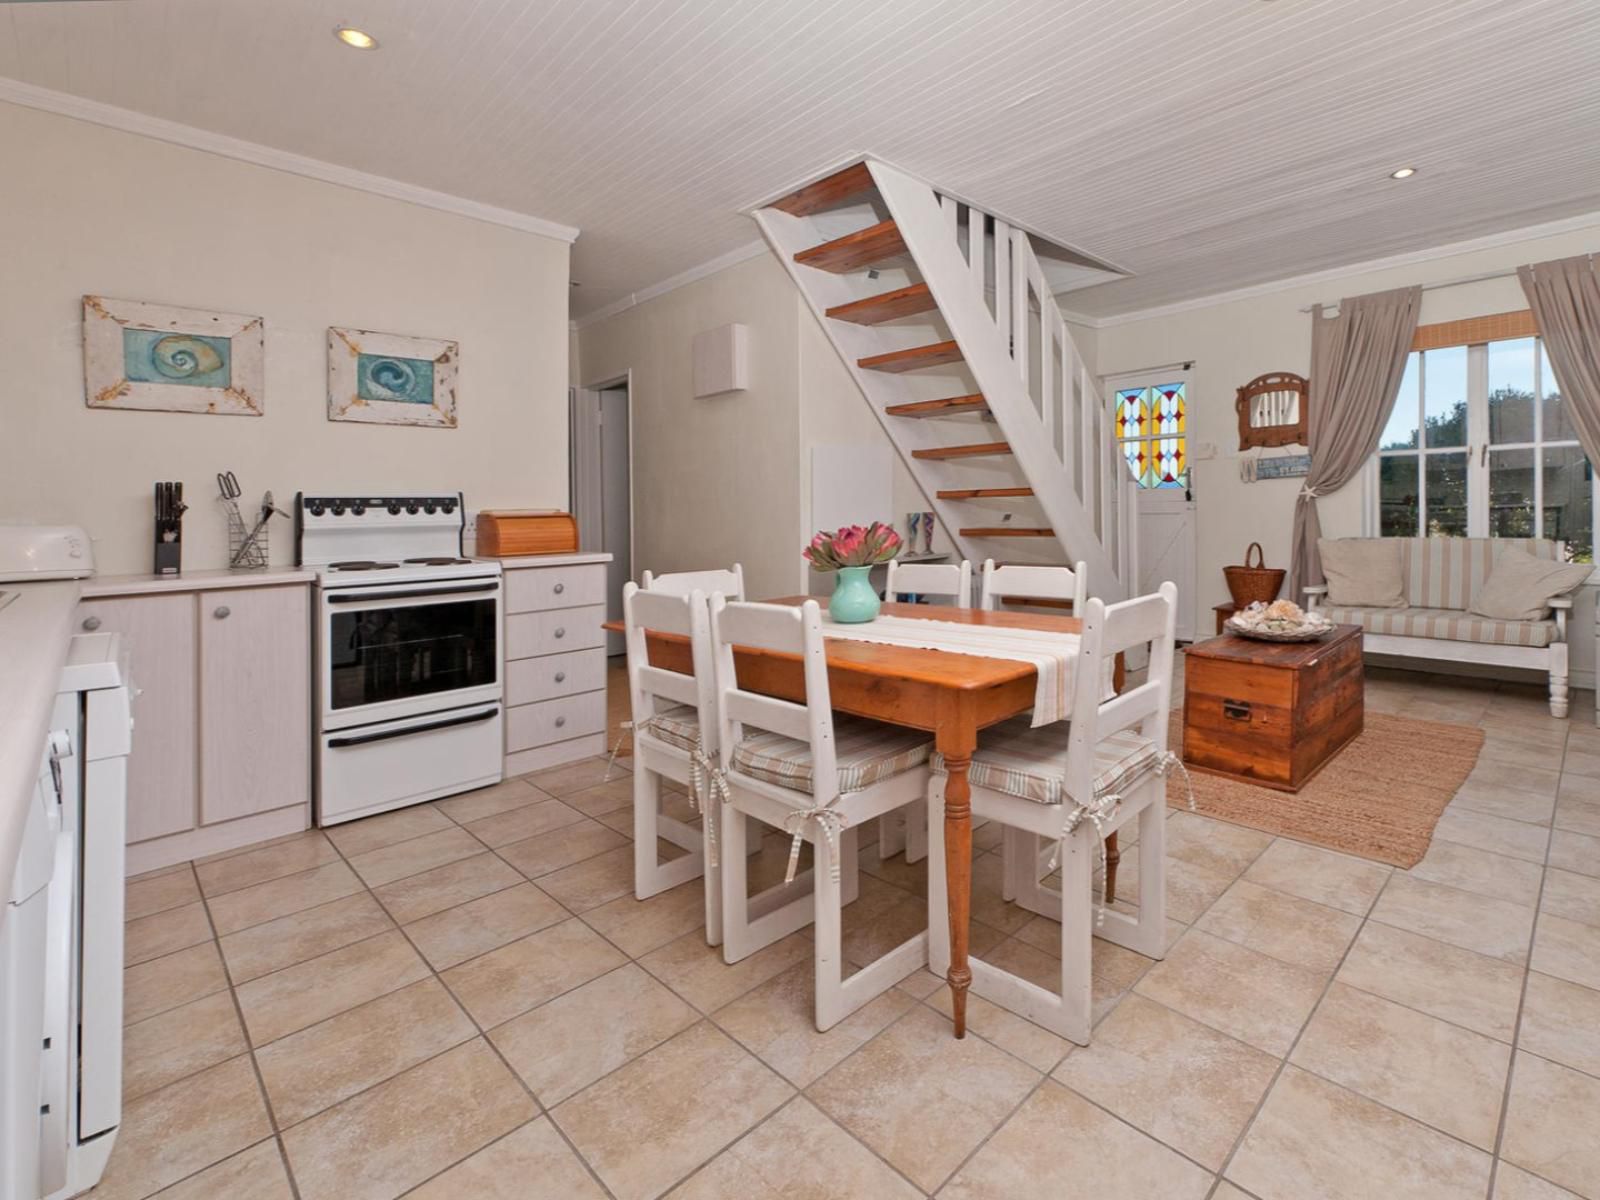 Pikkewyntjie Cottage Vermont Za Hermanus Western Cape South Africa Kitchen